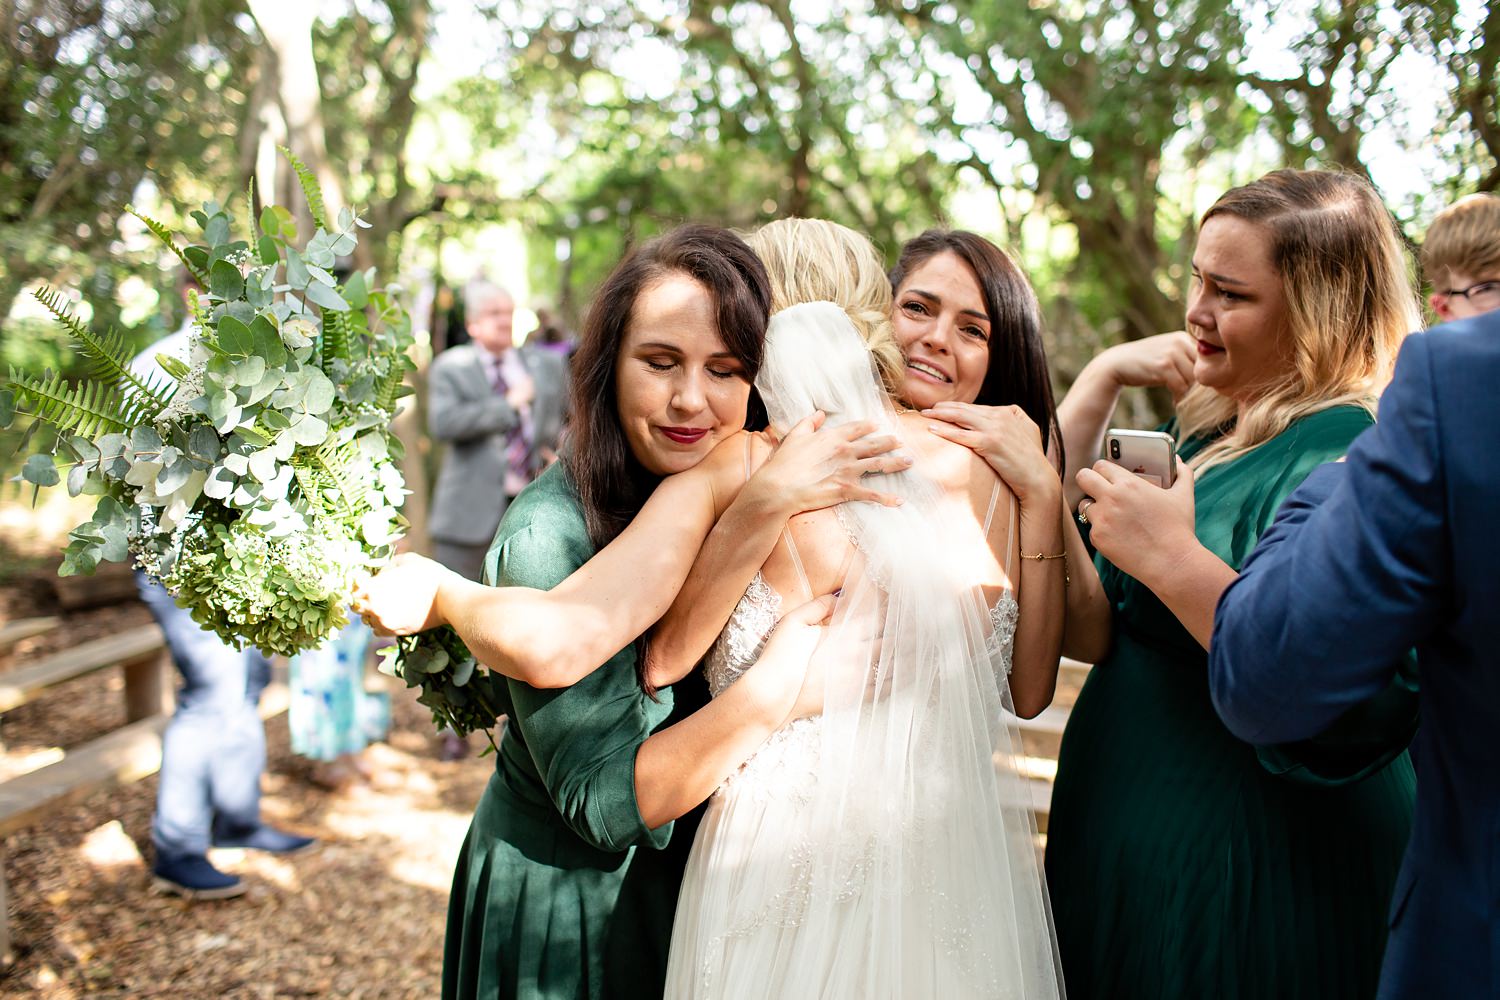 A bride is embraced by her emotional bridemaids dressed in emerald green by wedding photographer in South Africa, Niki M Photography